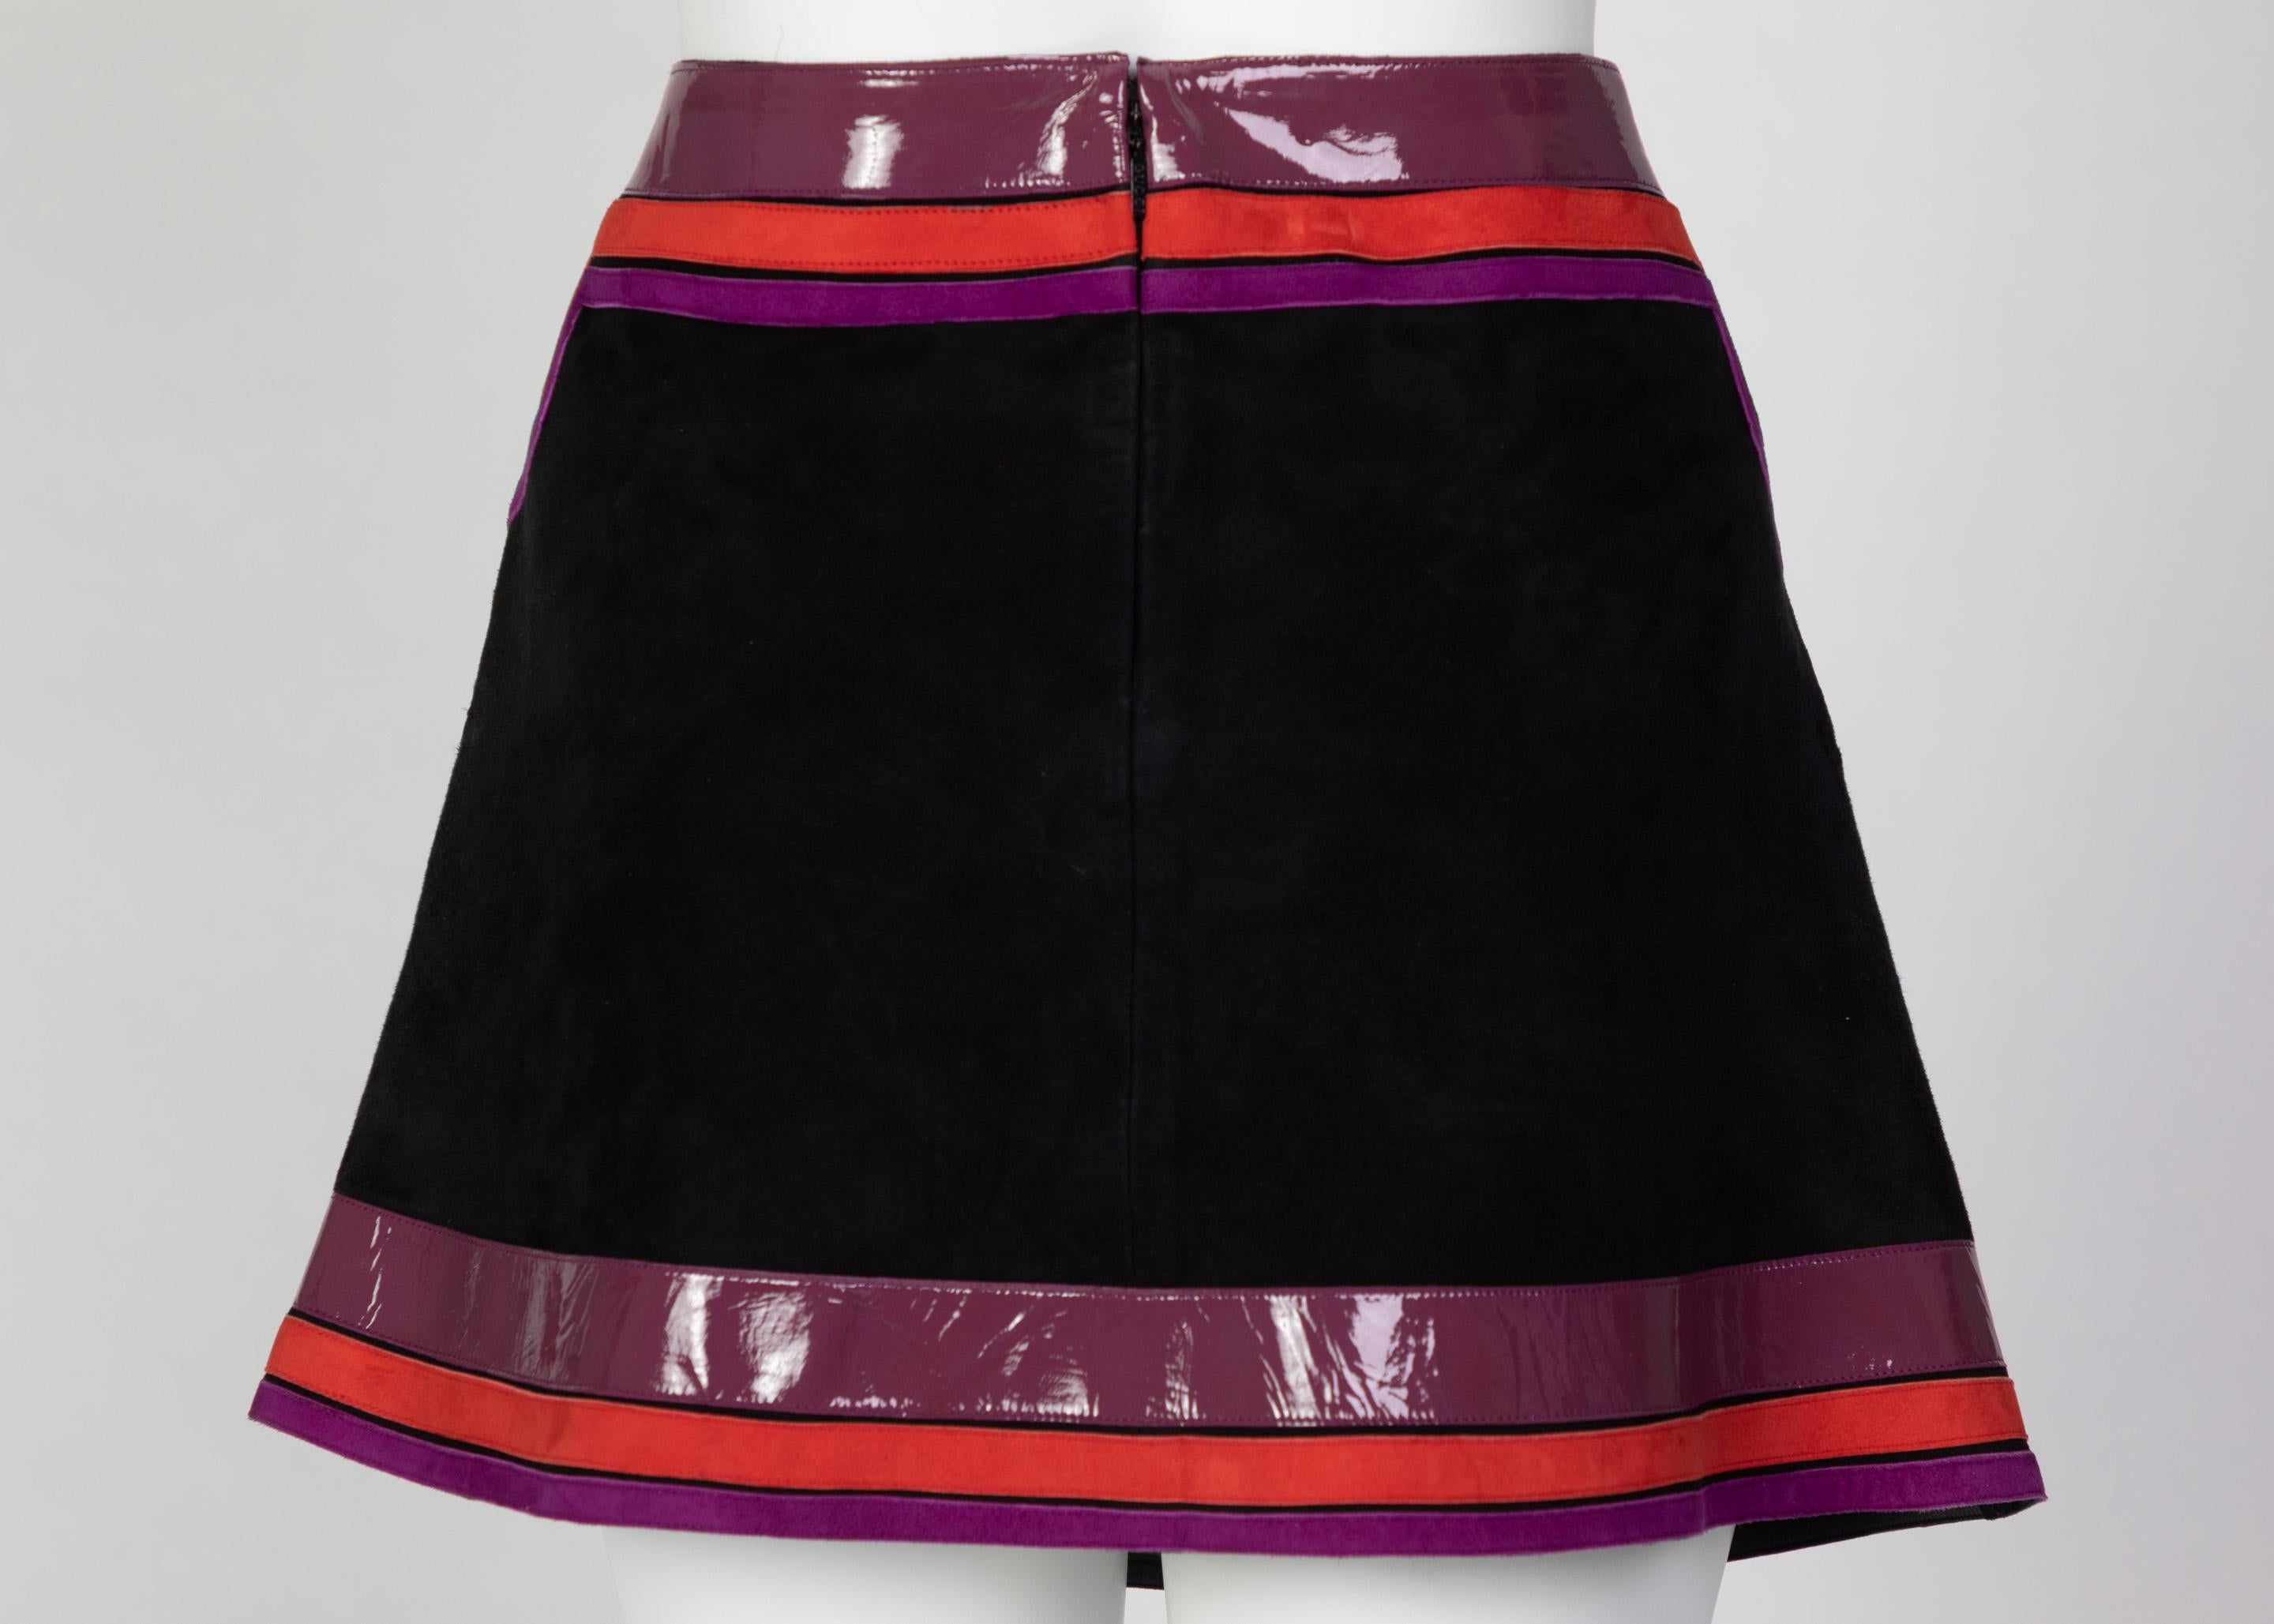 Gucci Black Suede Purple Pink Patent Leather Mod Mini Skirt Runway, 2007 In Excellent Condition For Sale In Boca Raton, FL